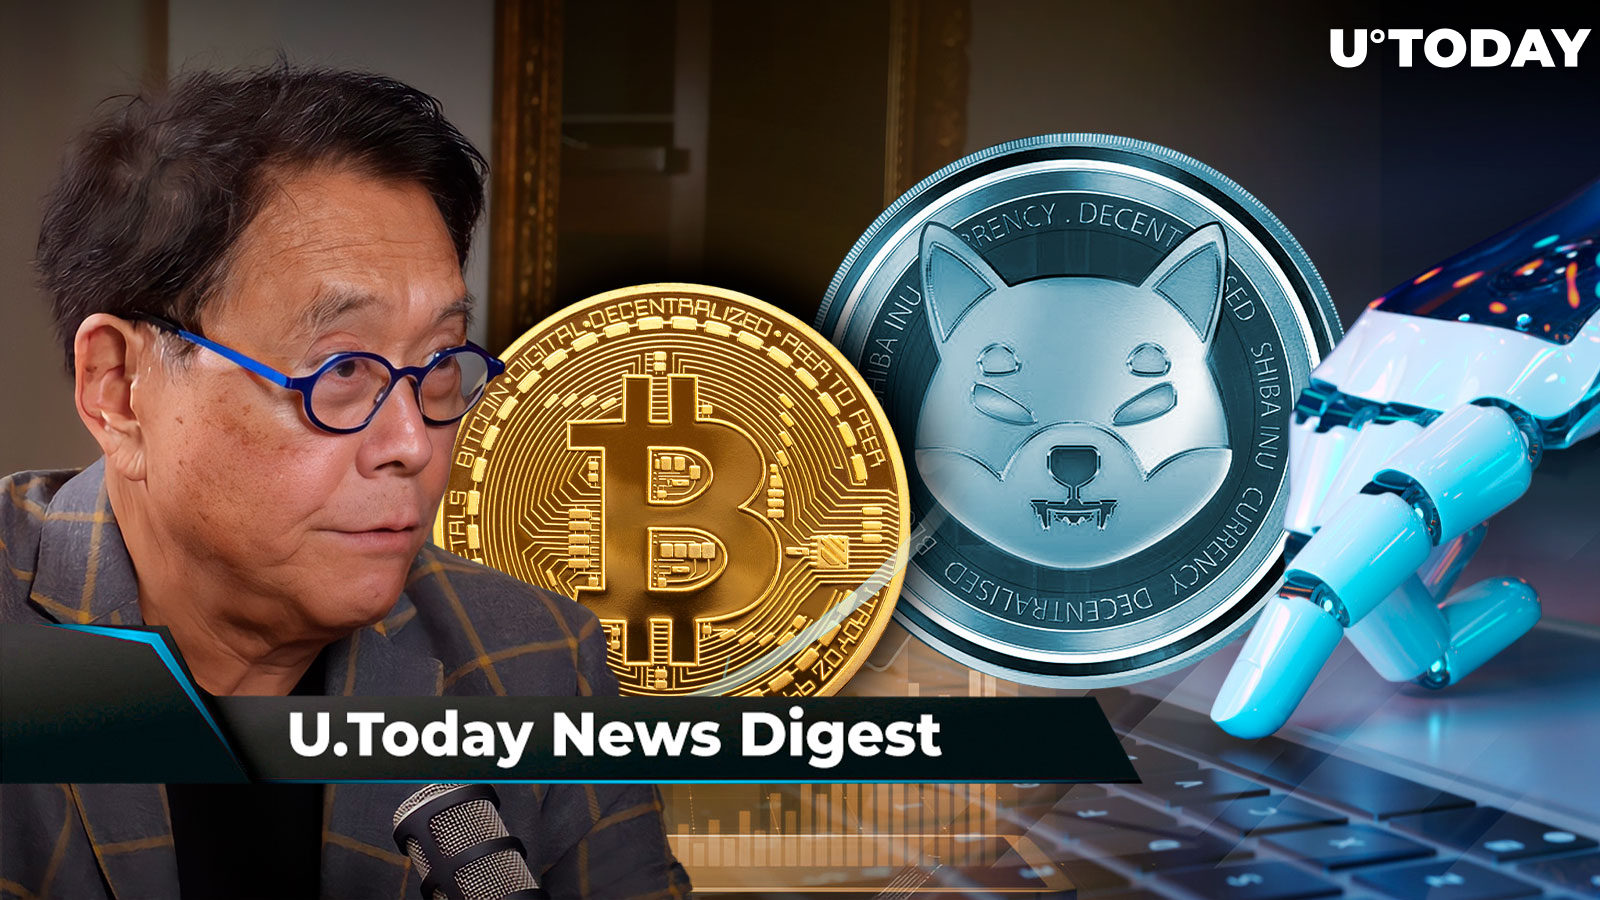 Robert Kiyosaki Names Profitable Asset That May Spike Soon, BTC Weekly Chart Signals Possible Breakout to $40,000, SHIB Lead Teases 'Secret' AI Initiatives: Crypto News Digest by U.Today